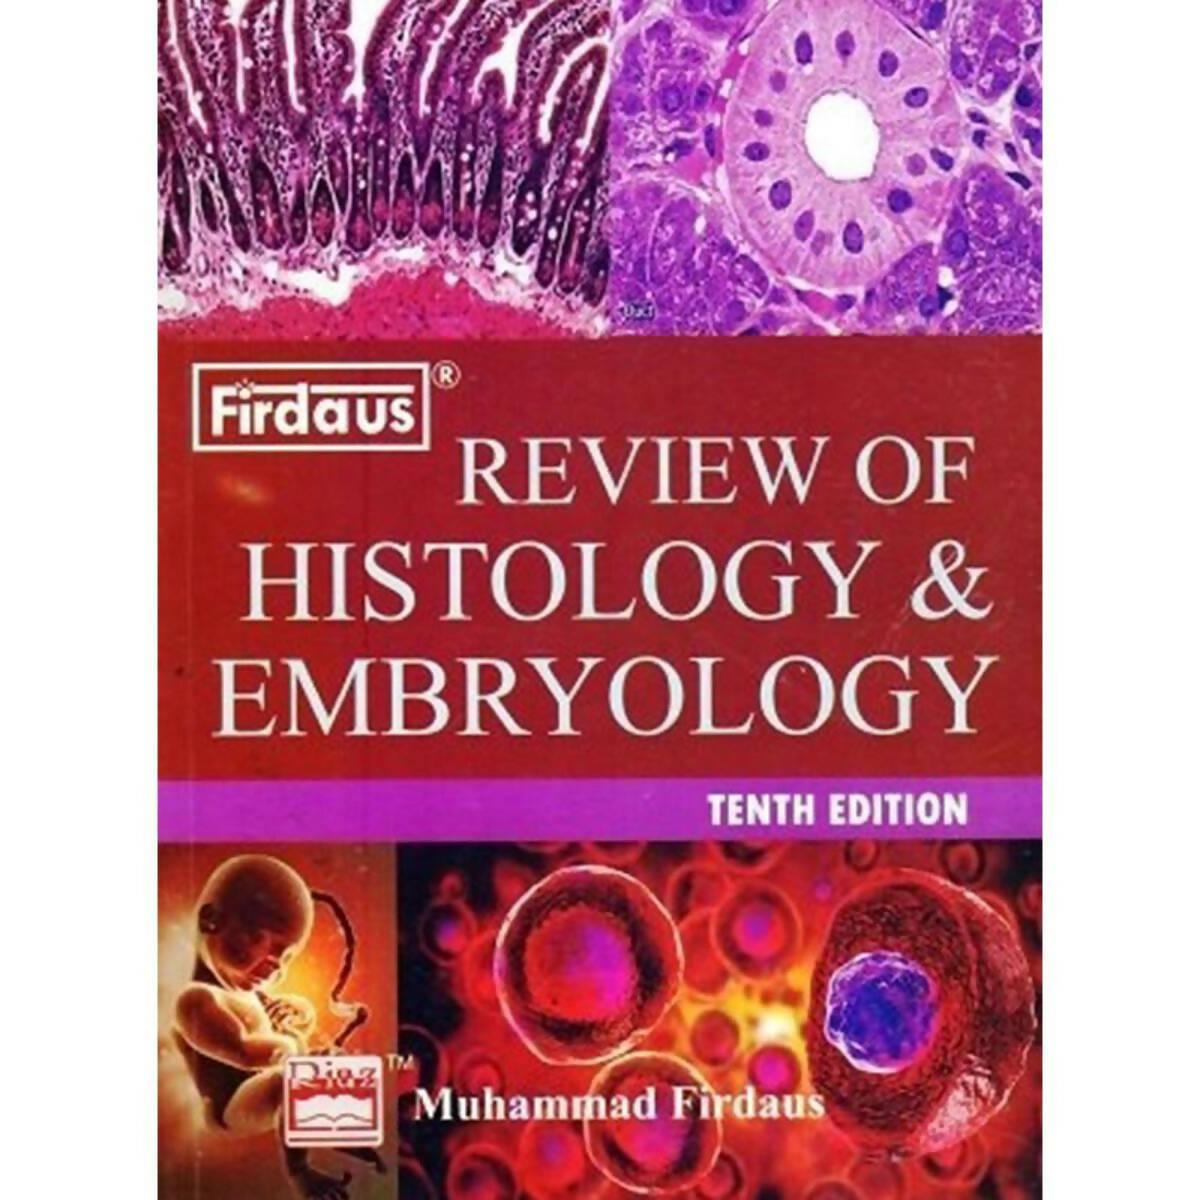 Firdaus Review of Histology and Embryology 10th Edition - ValueBox